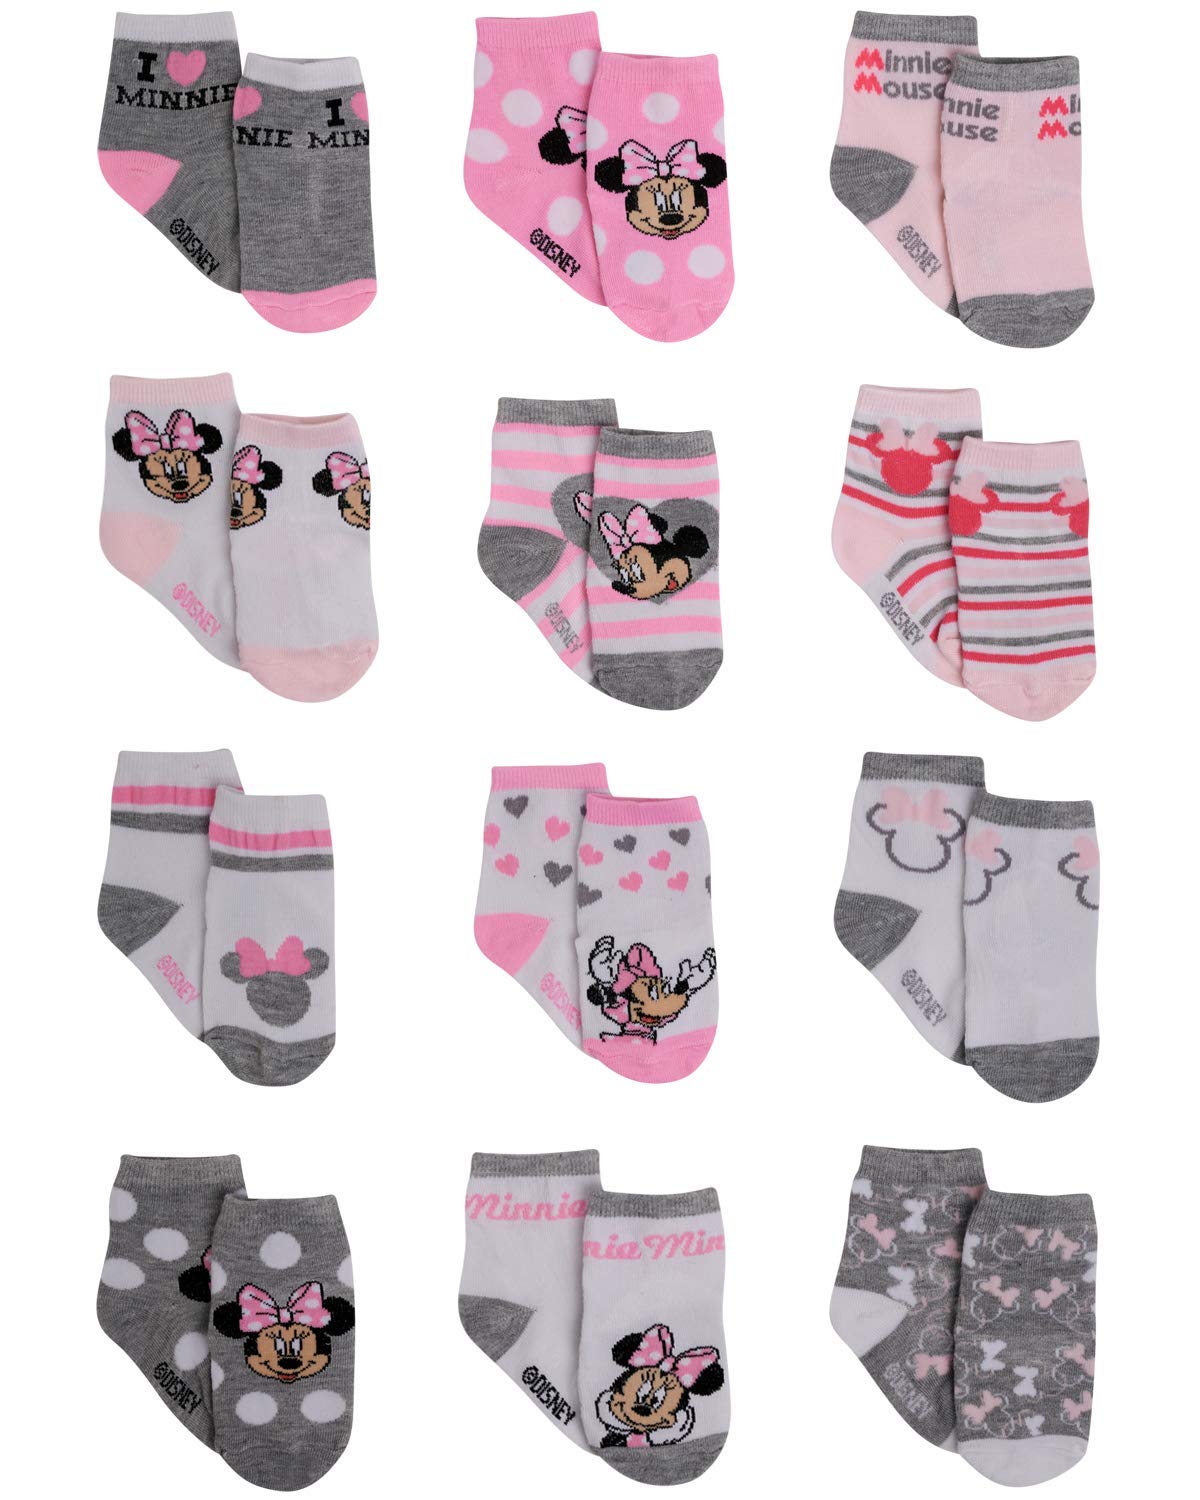 Book Cover Disney Baby Girl Socks - 12 Pack Minnie Mouse, Daisy Duck, Princess Socks for Infants - Newborn Essentials for Girls (0-24M) Minnie Mouse Pink/Grey 0-6 Months